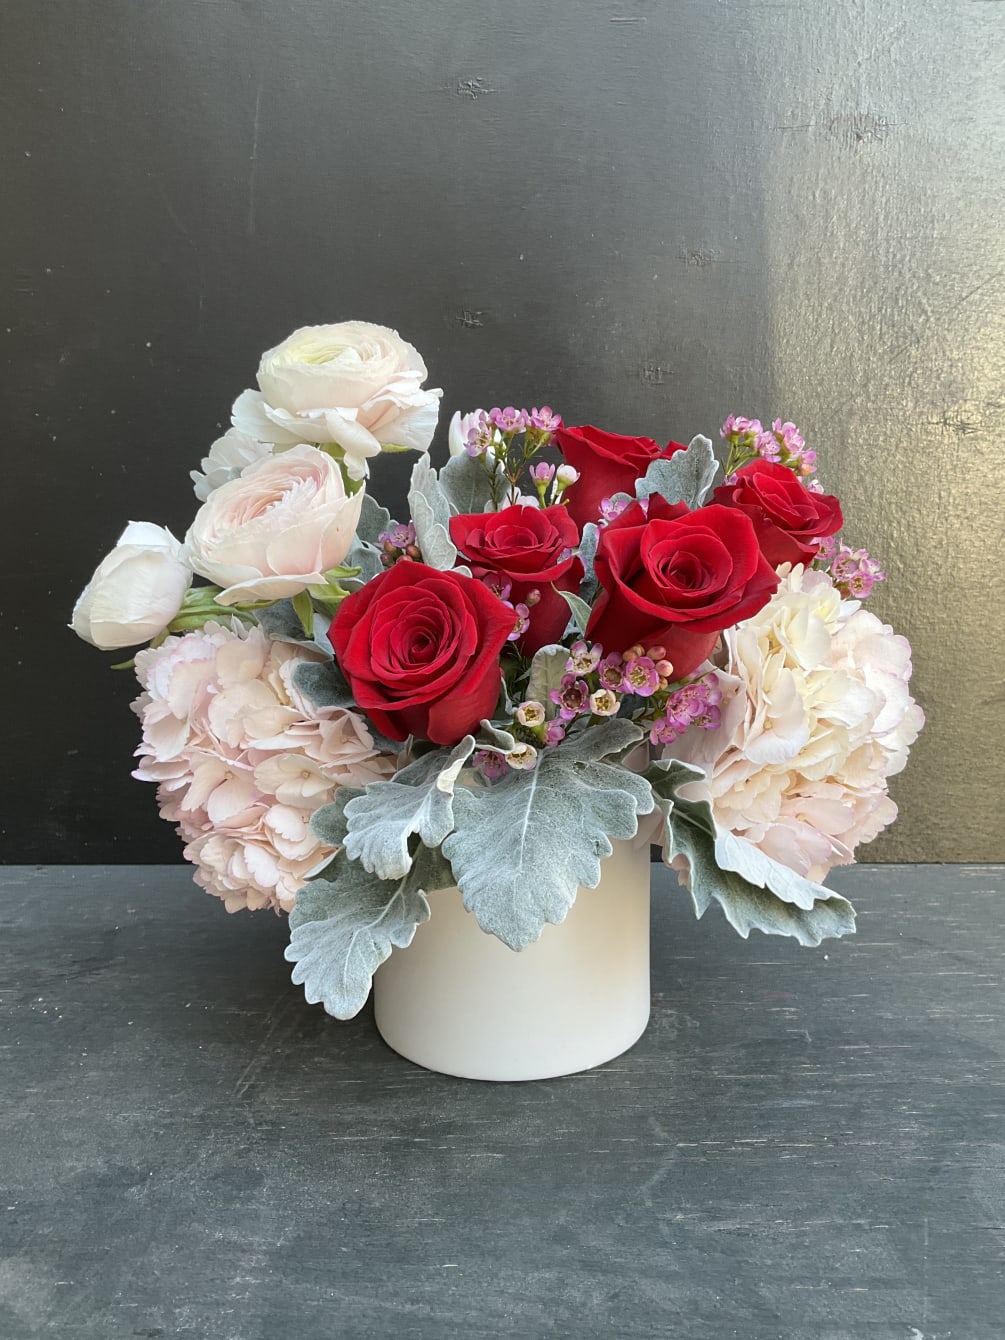 Wonderful pastel arrangement, with a pop of red for passion and love.